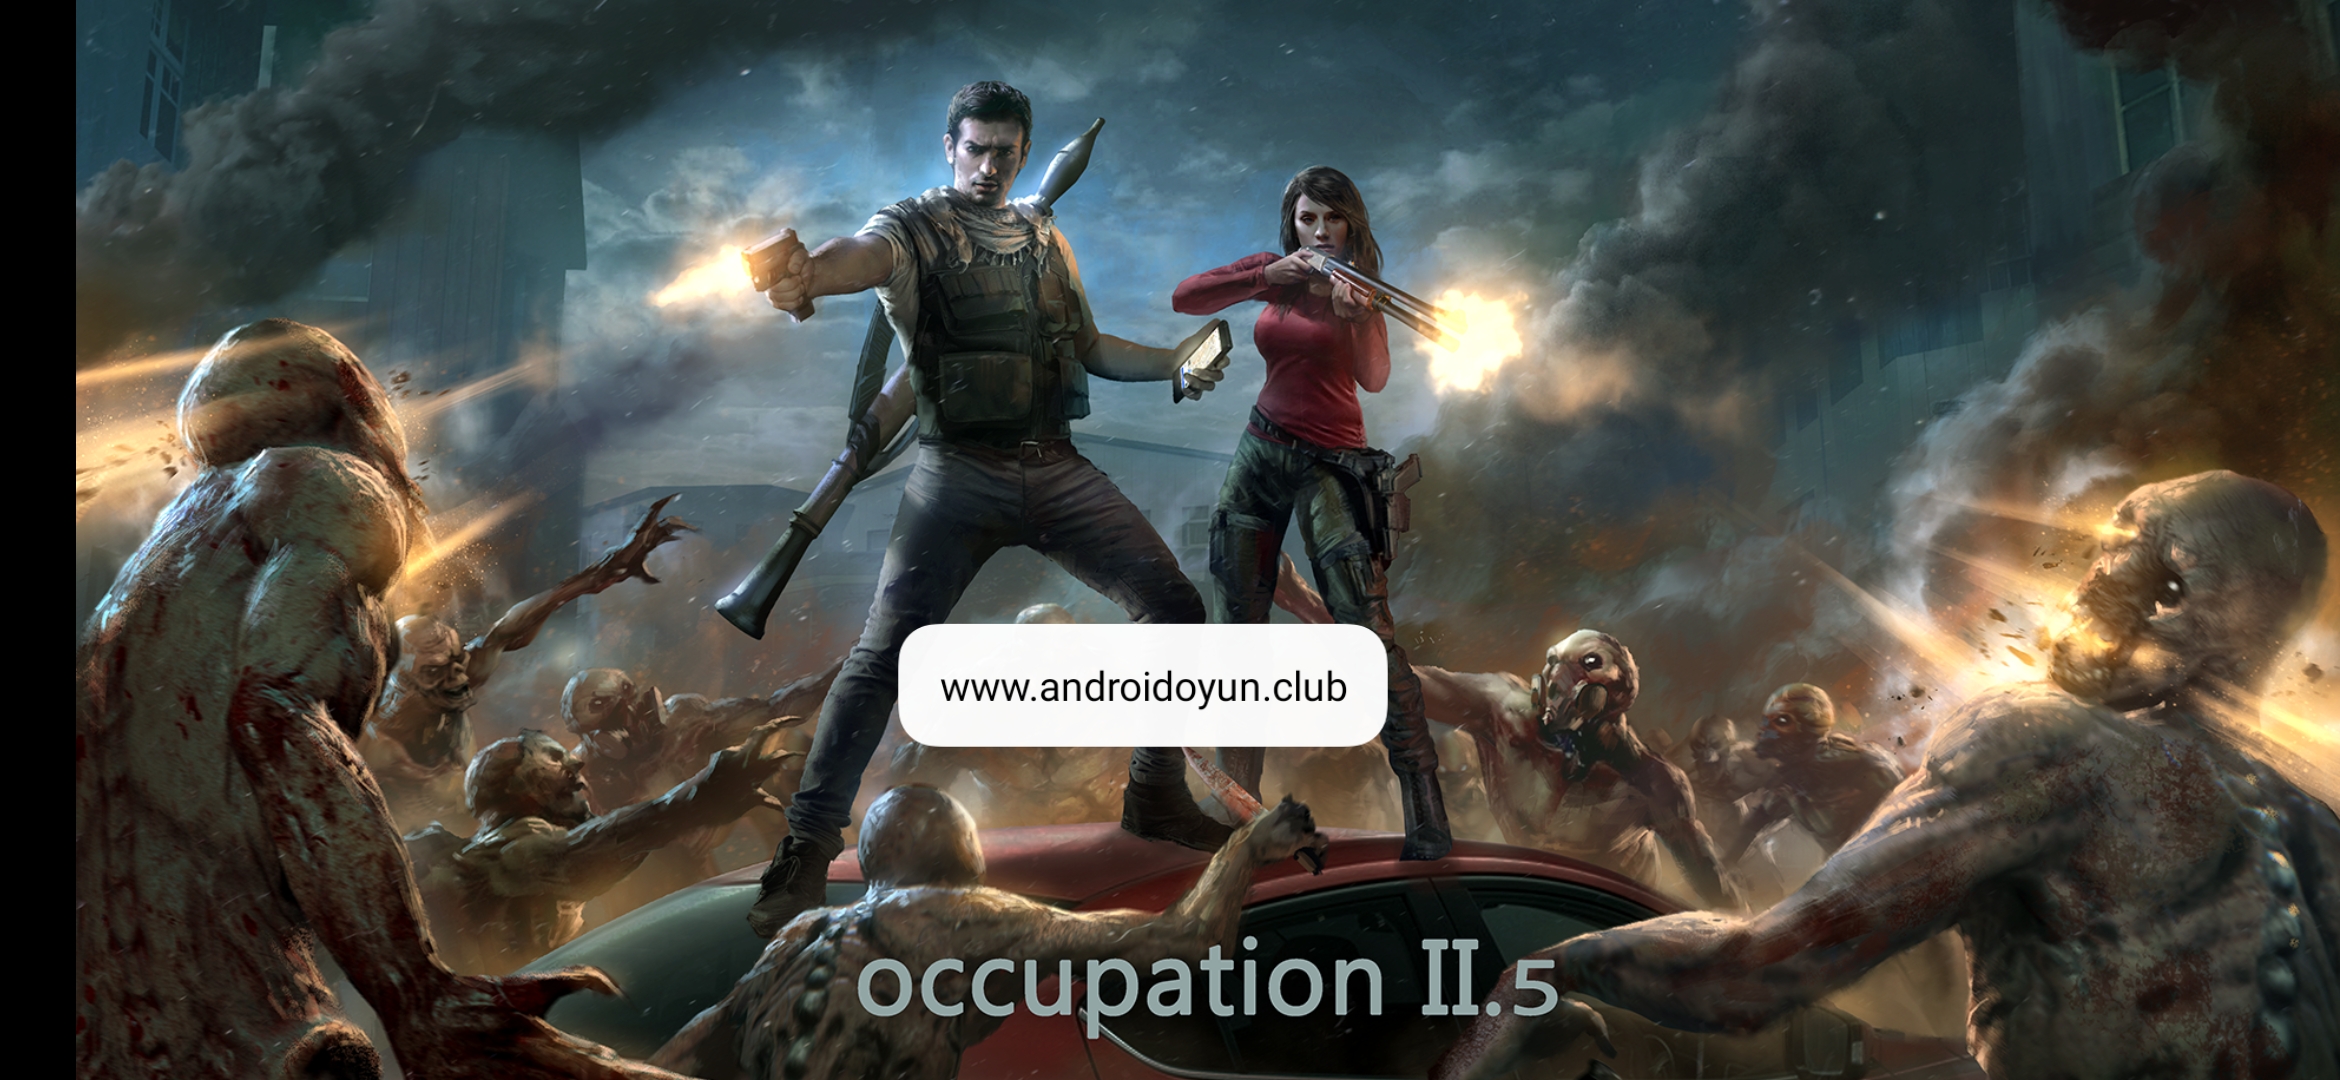 [Game Android] Occupation 2.5